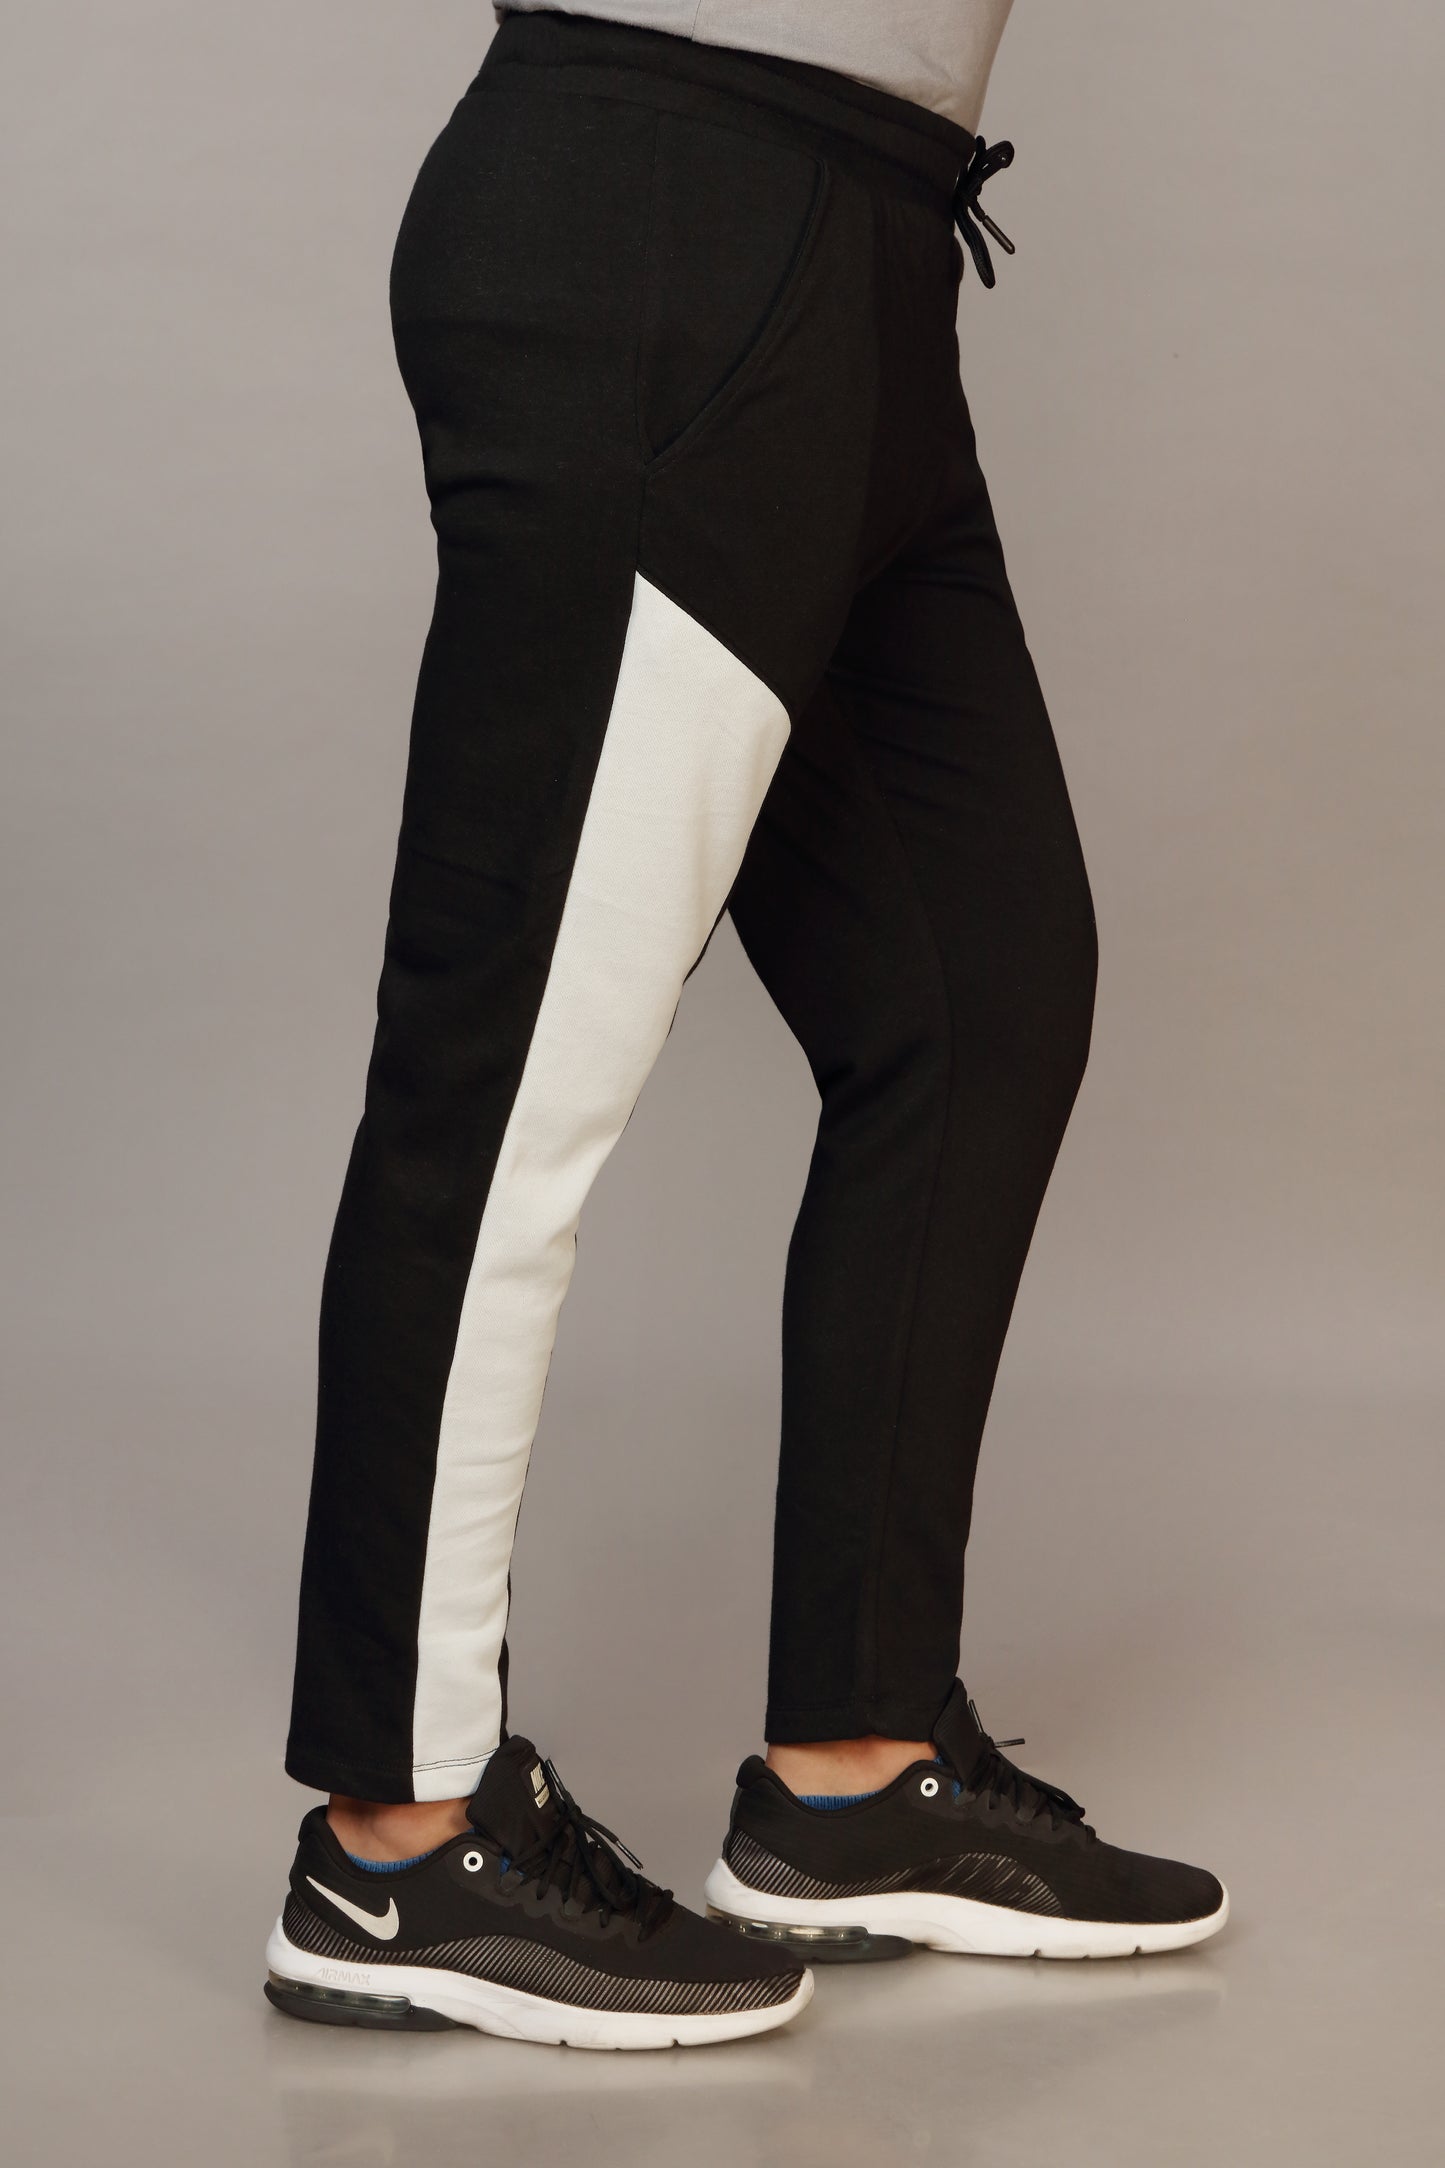 Black and White Panel Trouser